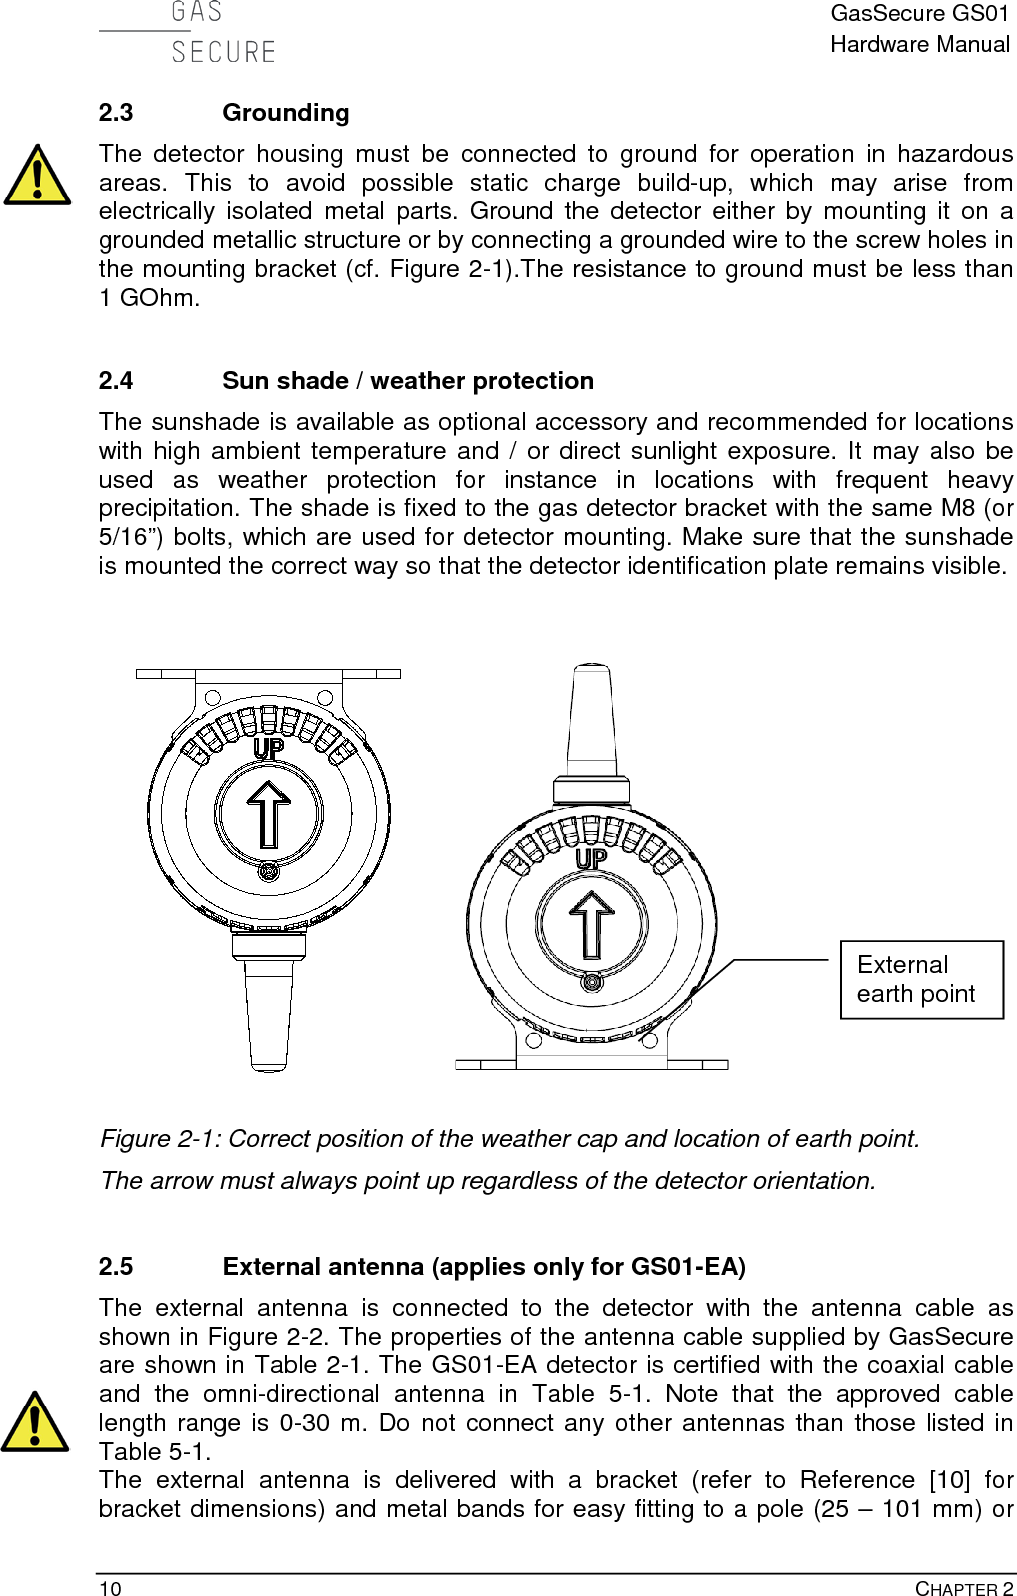  GasSecure GS01 Hardware Manual  10    CHAPTER 2 2.3 Grounding The detector housing must be connected to ground for operation in hazardous areas. This to avoid possible static charge build-up, which may arise from electrically isolated metal parts. Ground the detector either by mounting it on a grounded metallic structure or by connecting a grounded wire to the screw holes in the mounting bracket (cf. Figure 2-1).The resistance to ground must be less than 1 GOhm.  2.4 Sun shade / weather protection The sunshade is available as optional accessory and recommended for locations with high ambient temperature and / or direct sunlight exposure. It may also be used as weather protection for instance in locations with frequent heavy precipitation. The shade is fixed to the gas detector bracket with the same M8 (or 5/16”) bolts, which are used for detector mounting. Make sure that the sunshade is mounted the correct way so that the detector identification plate remains visible.   Figure 2-1: Correct position of the weather cap and location of earth point. The arrow must always point up regardless of the detector orientation.  2.5 External antenna (applies only for GS01-EA) The external antenna is connected to the detector with the antenna cable  as shown in Figure 2-2. The properties of the antenna cable supplied by GasSecure are shown in Table 2-1. The GS01-EA detector is certified with the coaxial cable and  the  omni-directional antenna in  Table  5-1.  Note that the approved cable length range is 0-30 m. Do not connect any other antennas than those listed in Table 5-1. The external antenna is delivered with a bracket (refer to Reference [10] for bracket dimensions) and metal bands for easy fitting to a pole (25 – 101 mm) or External earth point 